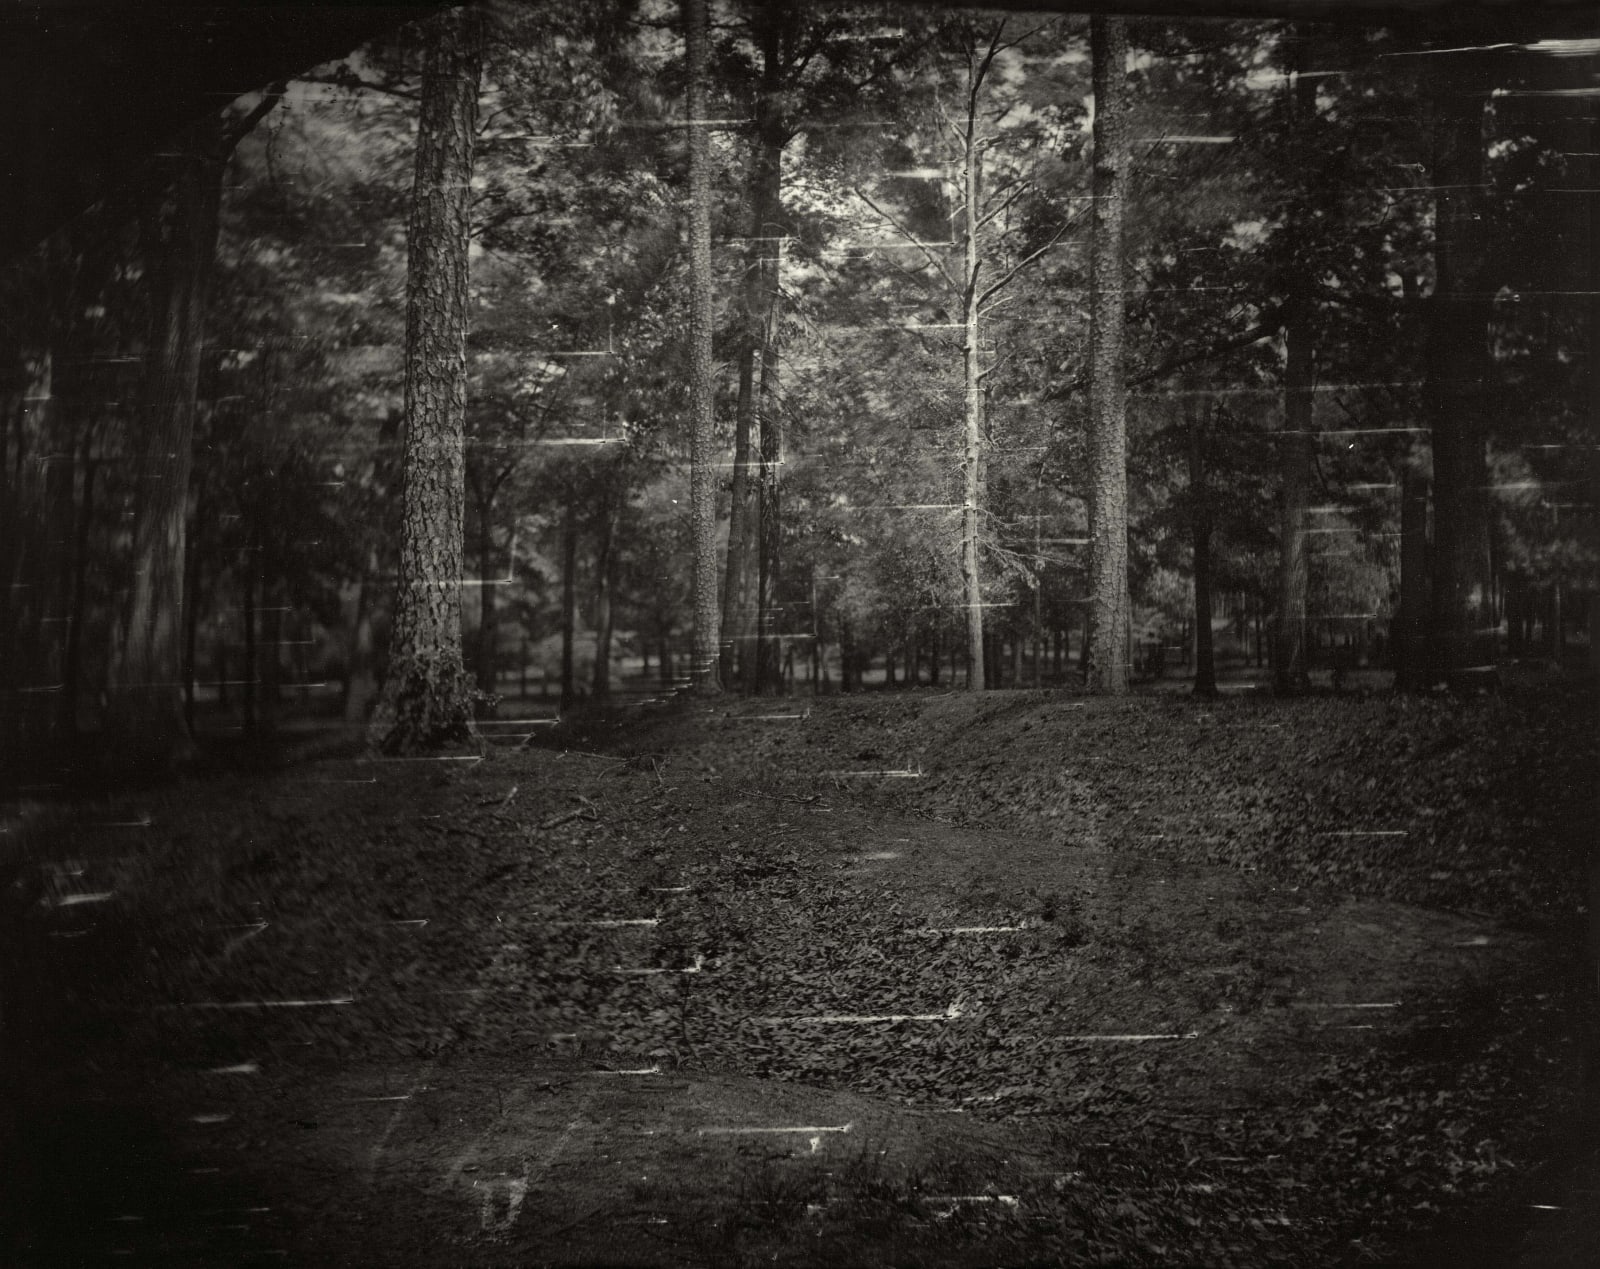 Sally Mann Battlefields Untitled Cold Harbor Battle, photograph of southern landscape with trees